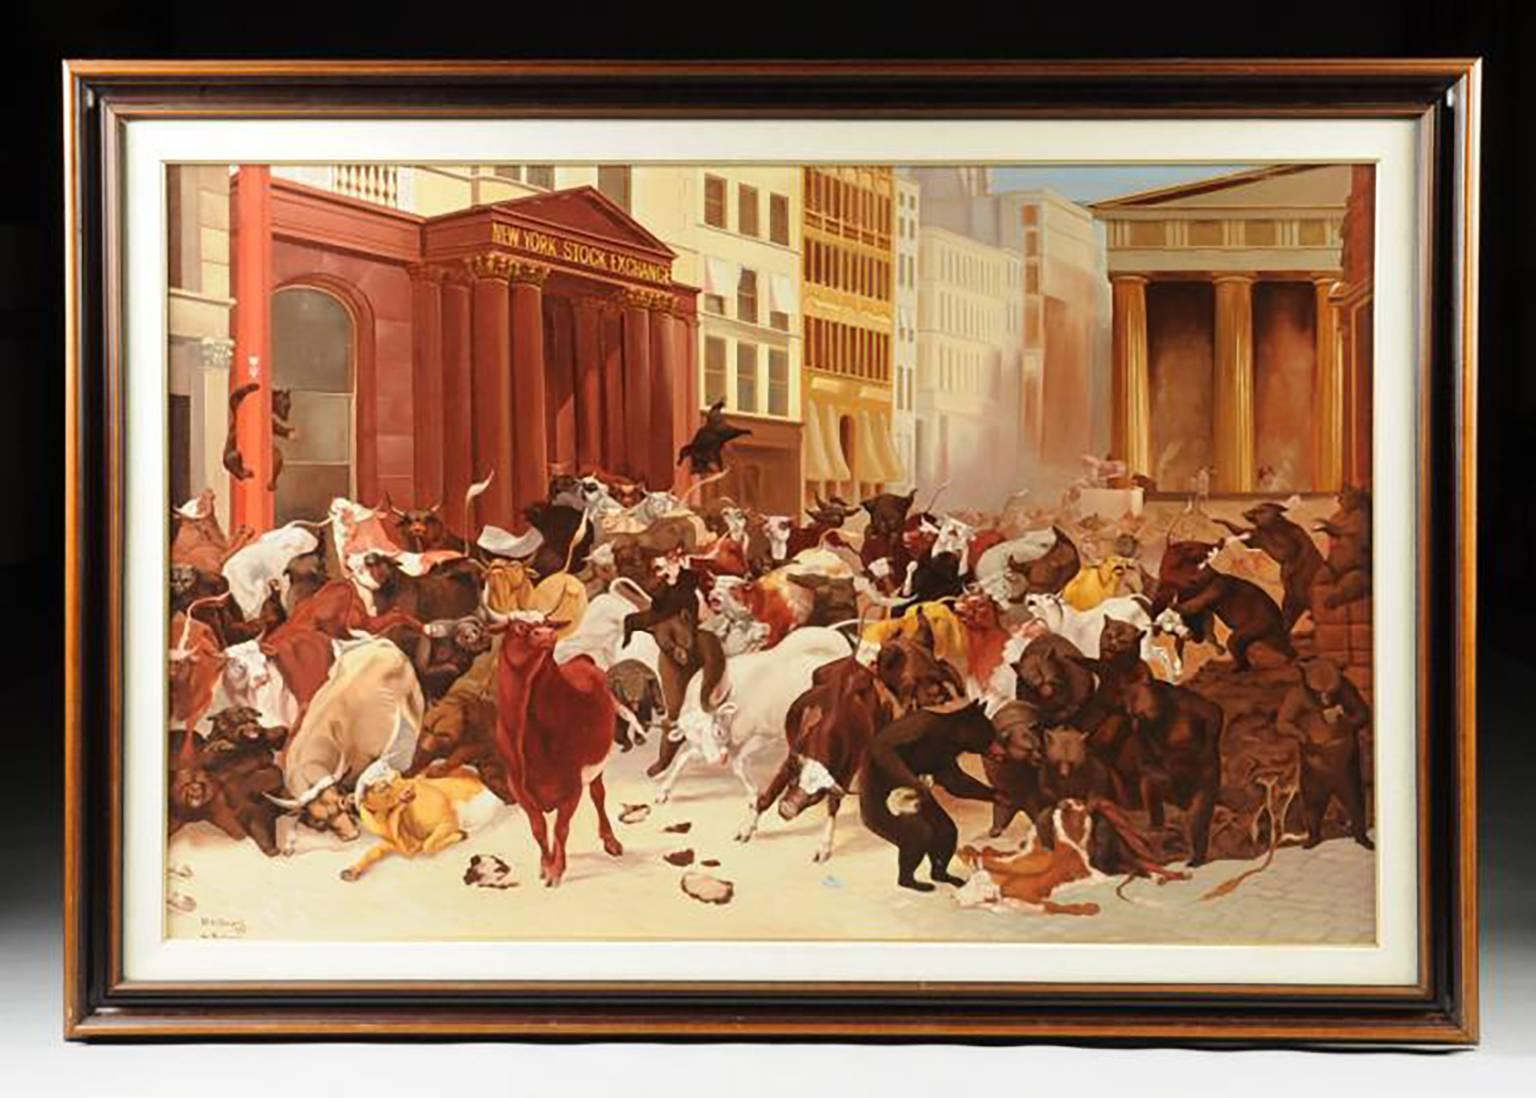 Ron Anderson Animal Painting - Oil Painting After W. H. Beard Entitled “New York Stock Exchange, Bulls & Bears"